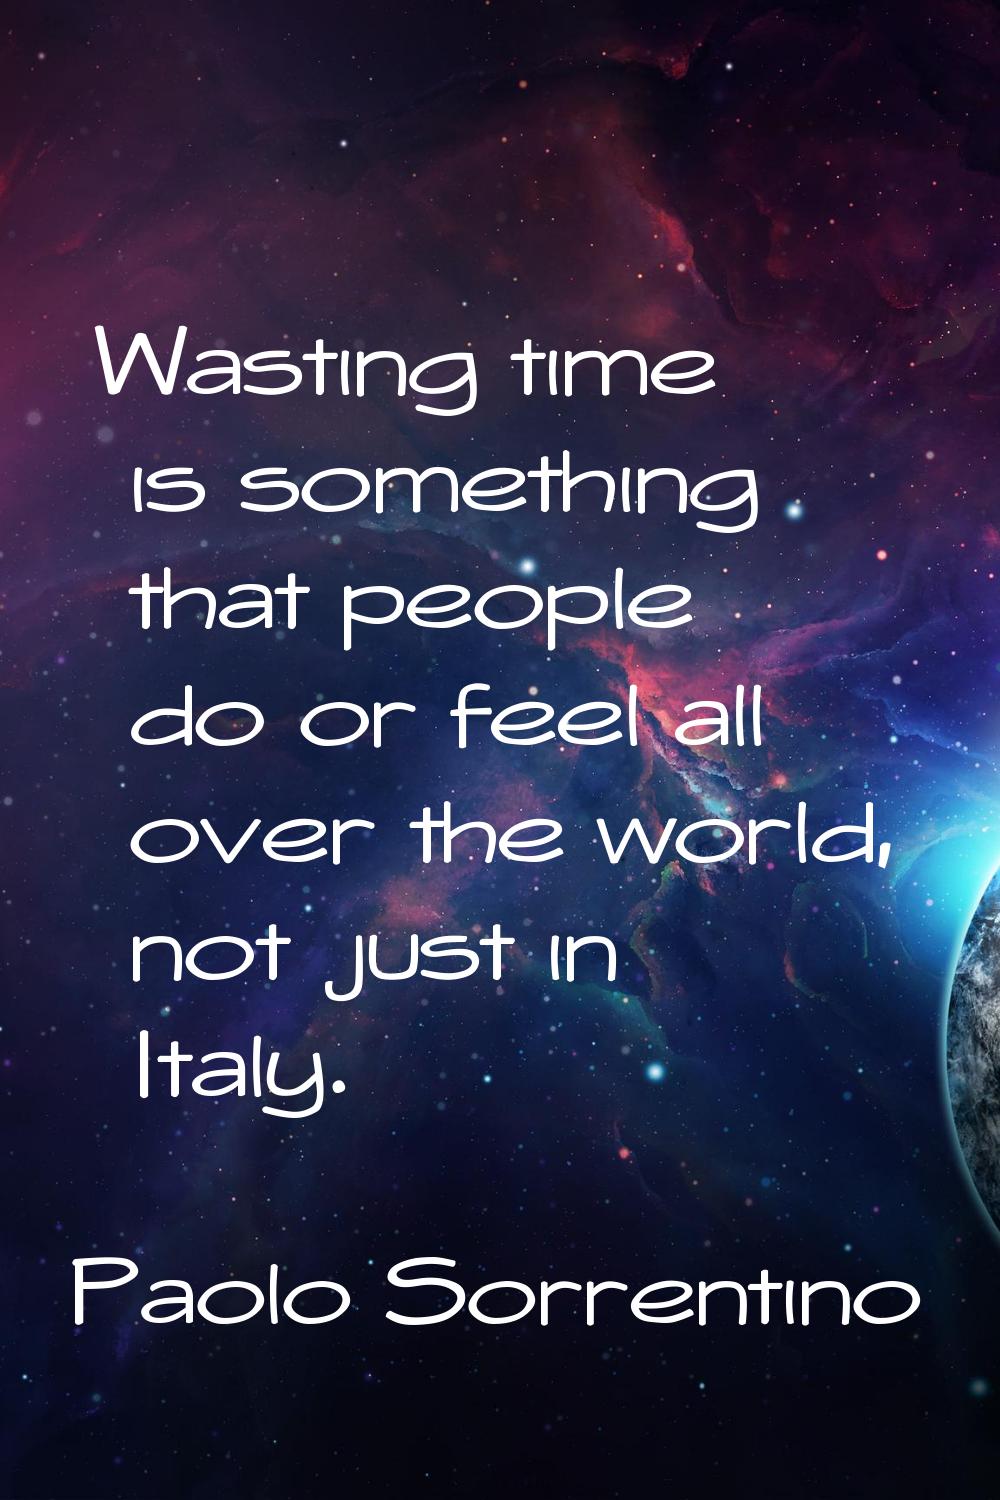 Wasting time is something that people do or feel all over the world, not just in Italy.